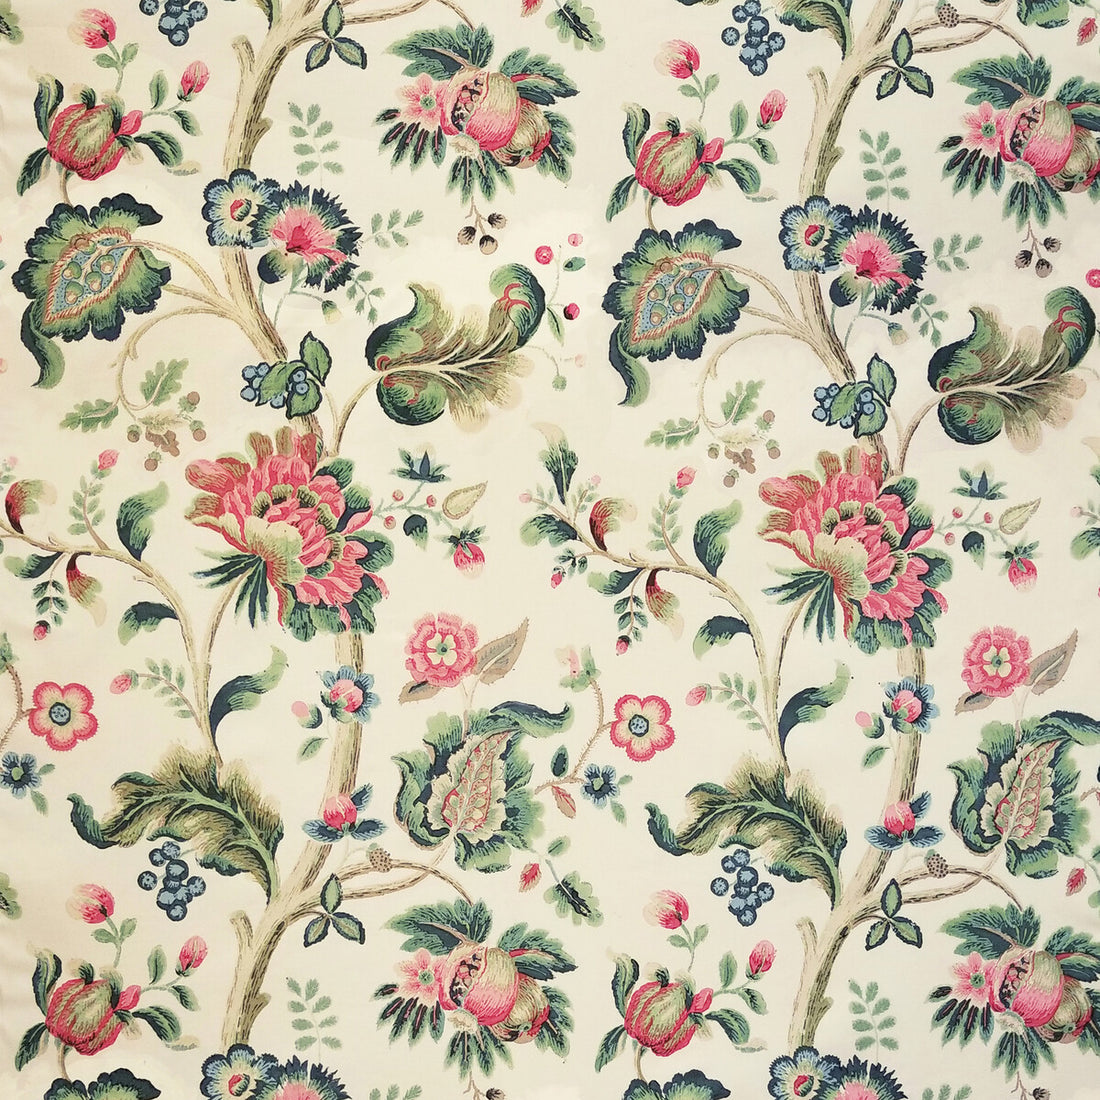 Treyes Print fabric in pink/green color - pattern 2010151.73.0 - by Lee Jofa in the Heritage collection